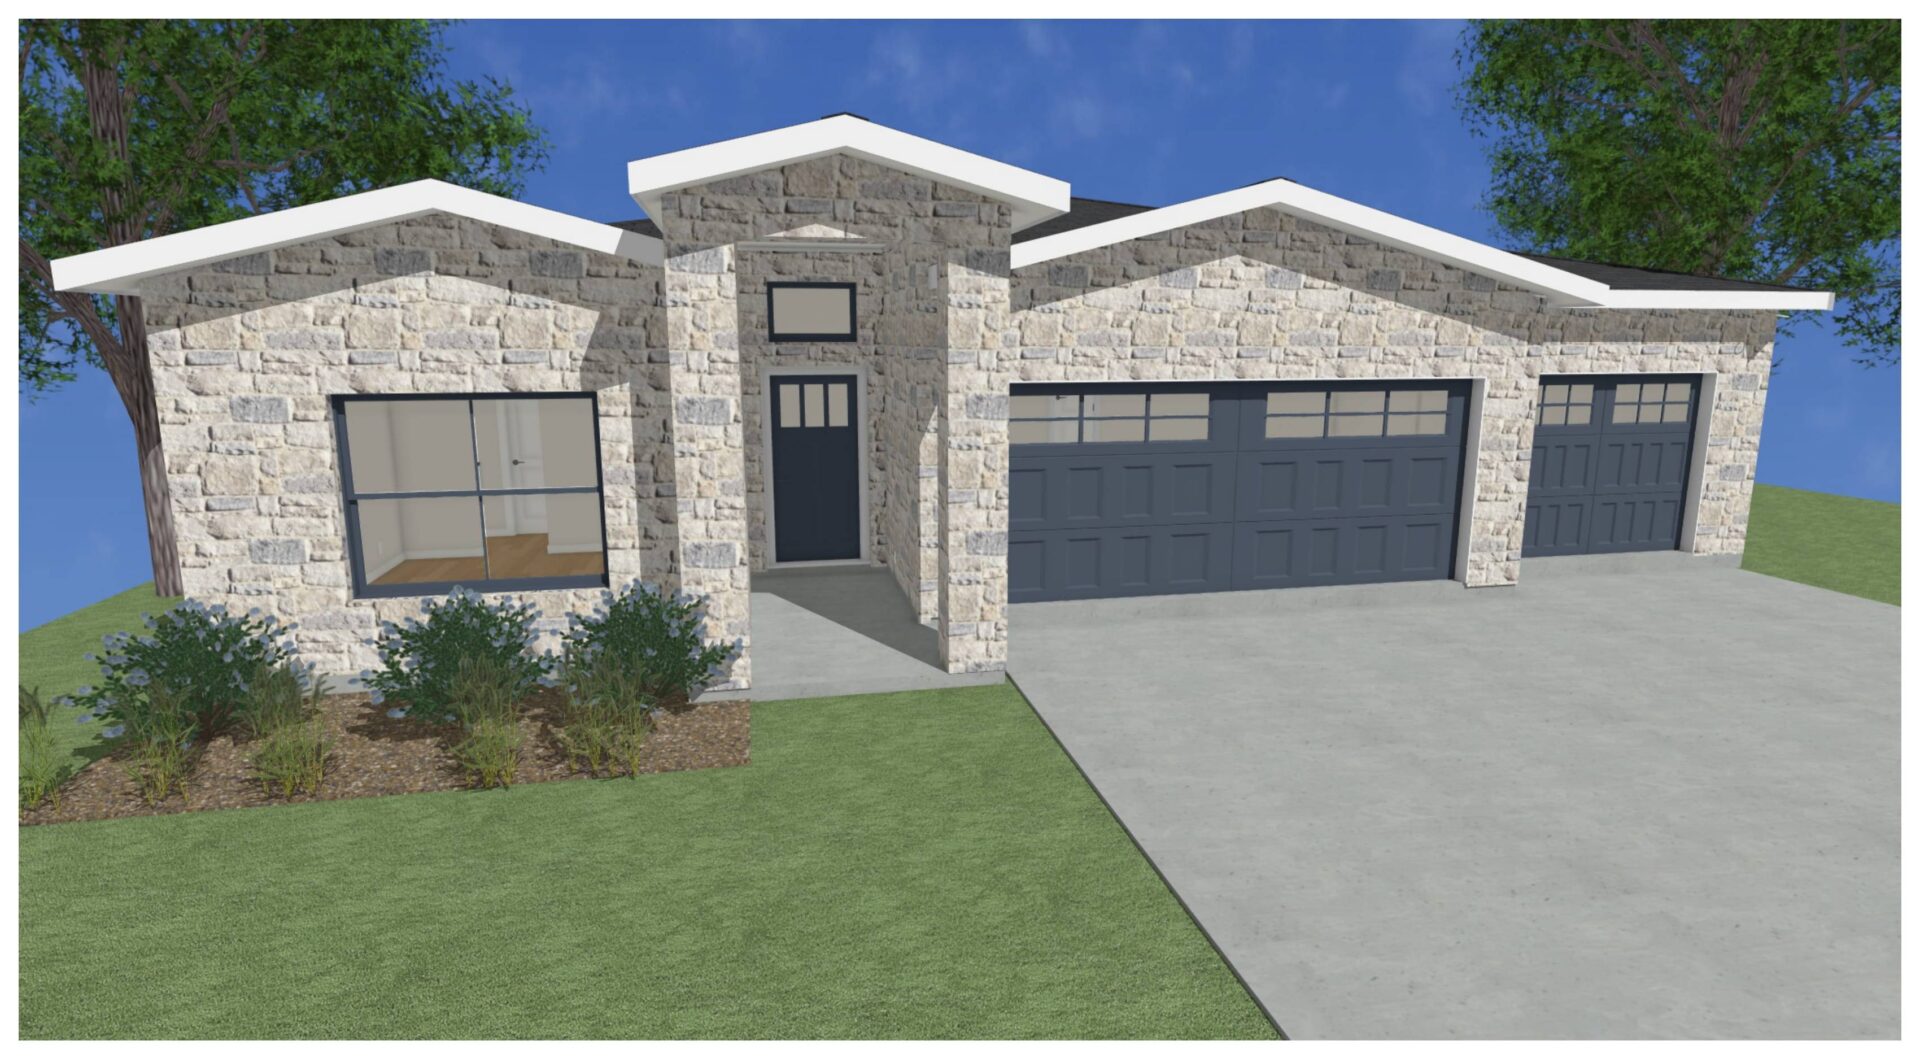 A rendering of a home with two garages.